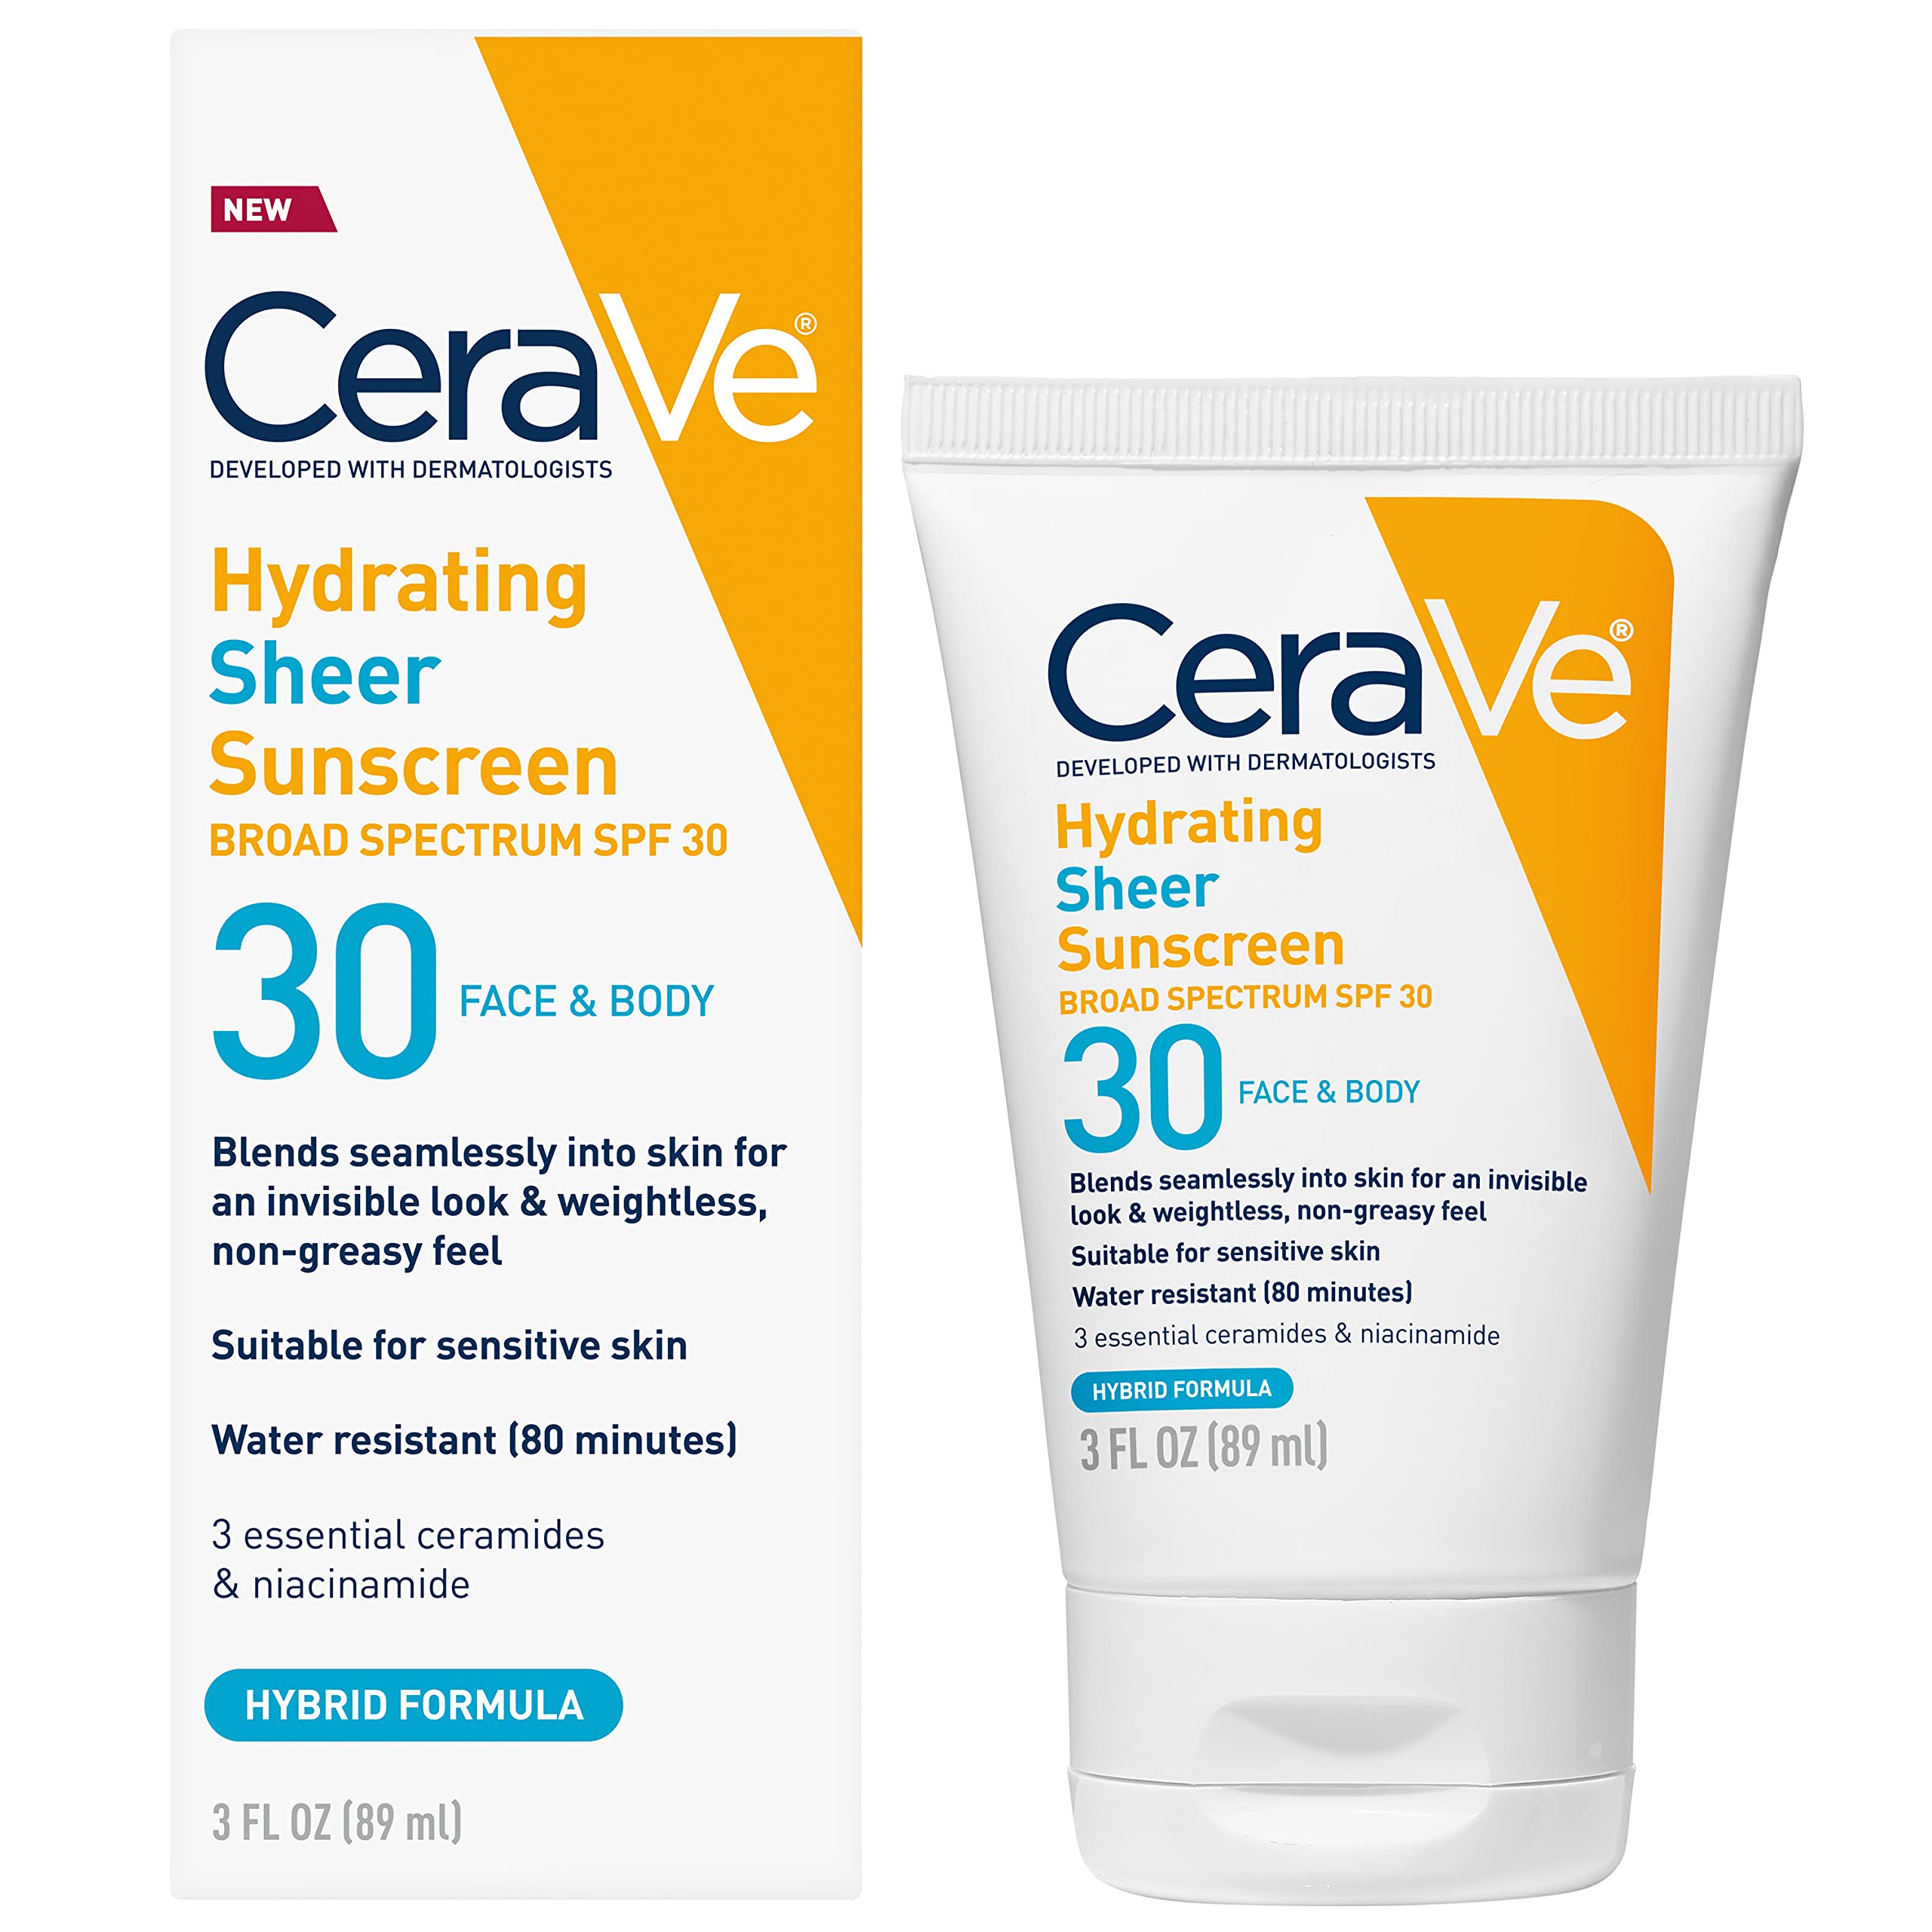 CeraVe Hydrating Sheer Sunscreen SPF 30 for Face and Body | Mineral Sunscreen & Chemical Sunscreen with Zinc Oxide, Hyaluronic Acid, Niacinamides and Ceramides| Paraben Free Fragrance Free | 3 Ounces